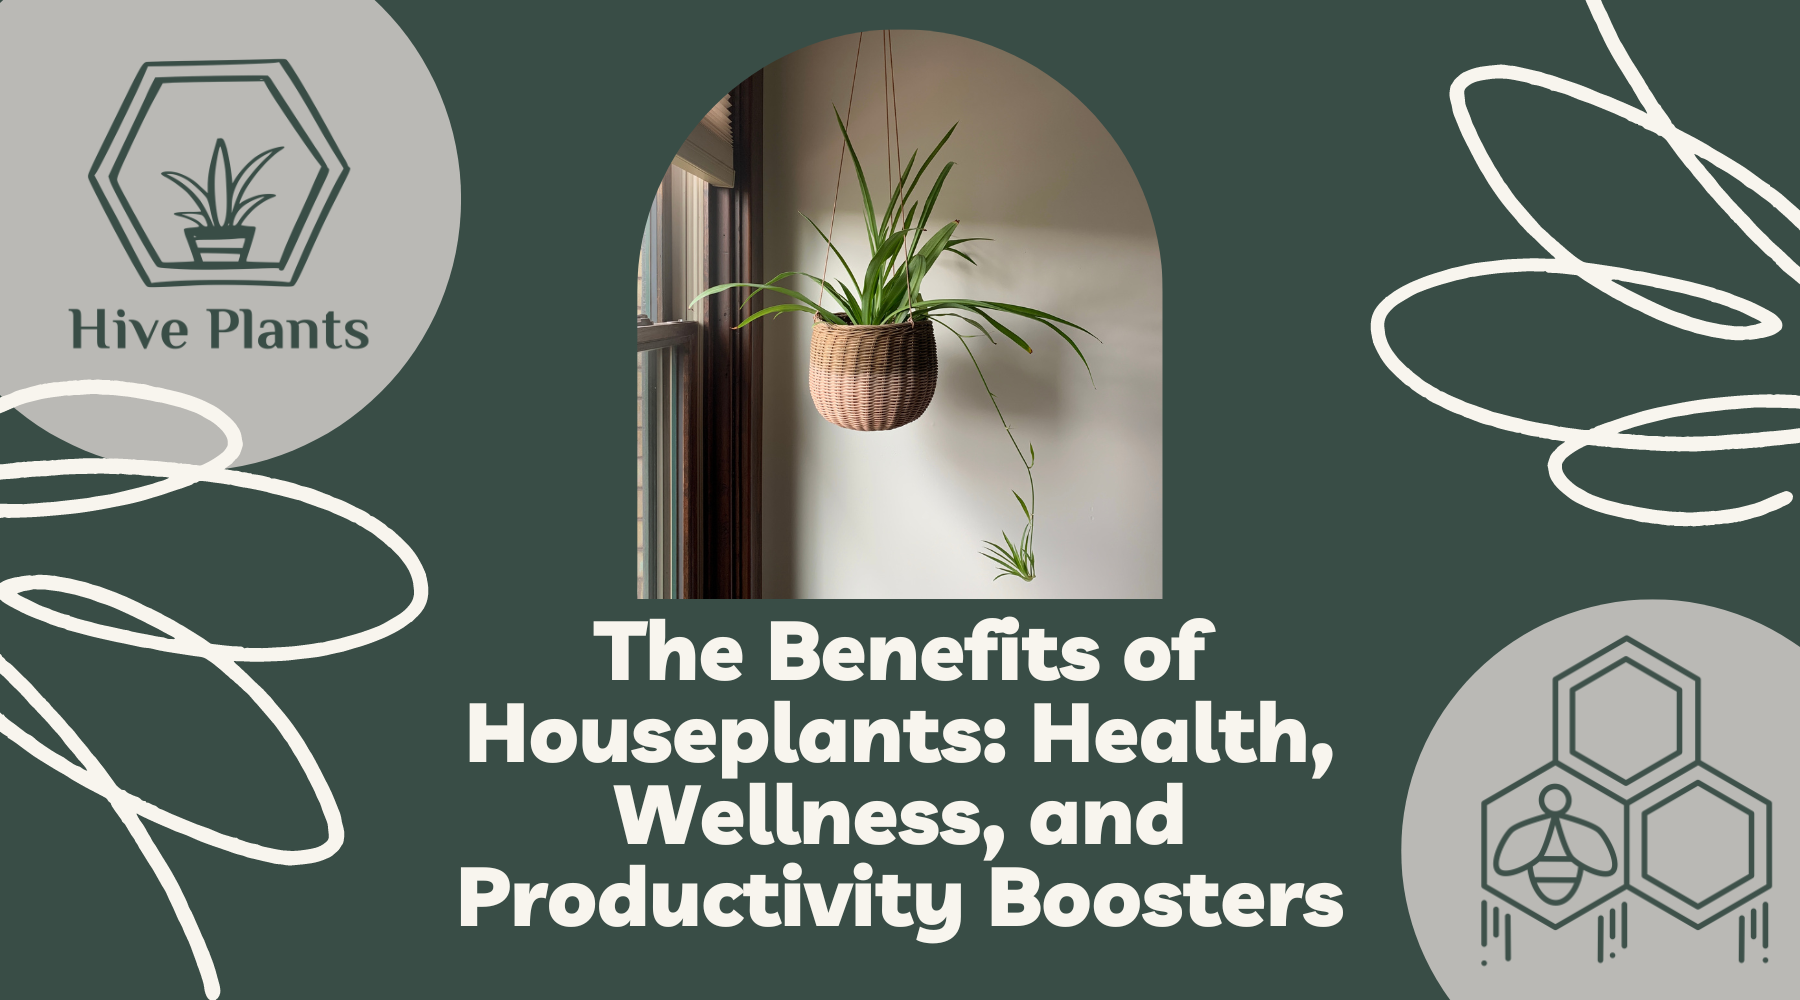 The Benefits of Houseplants: Health, Wellness, and Productivity Boosters